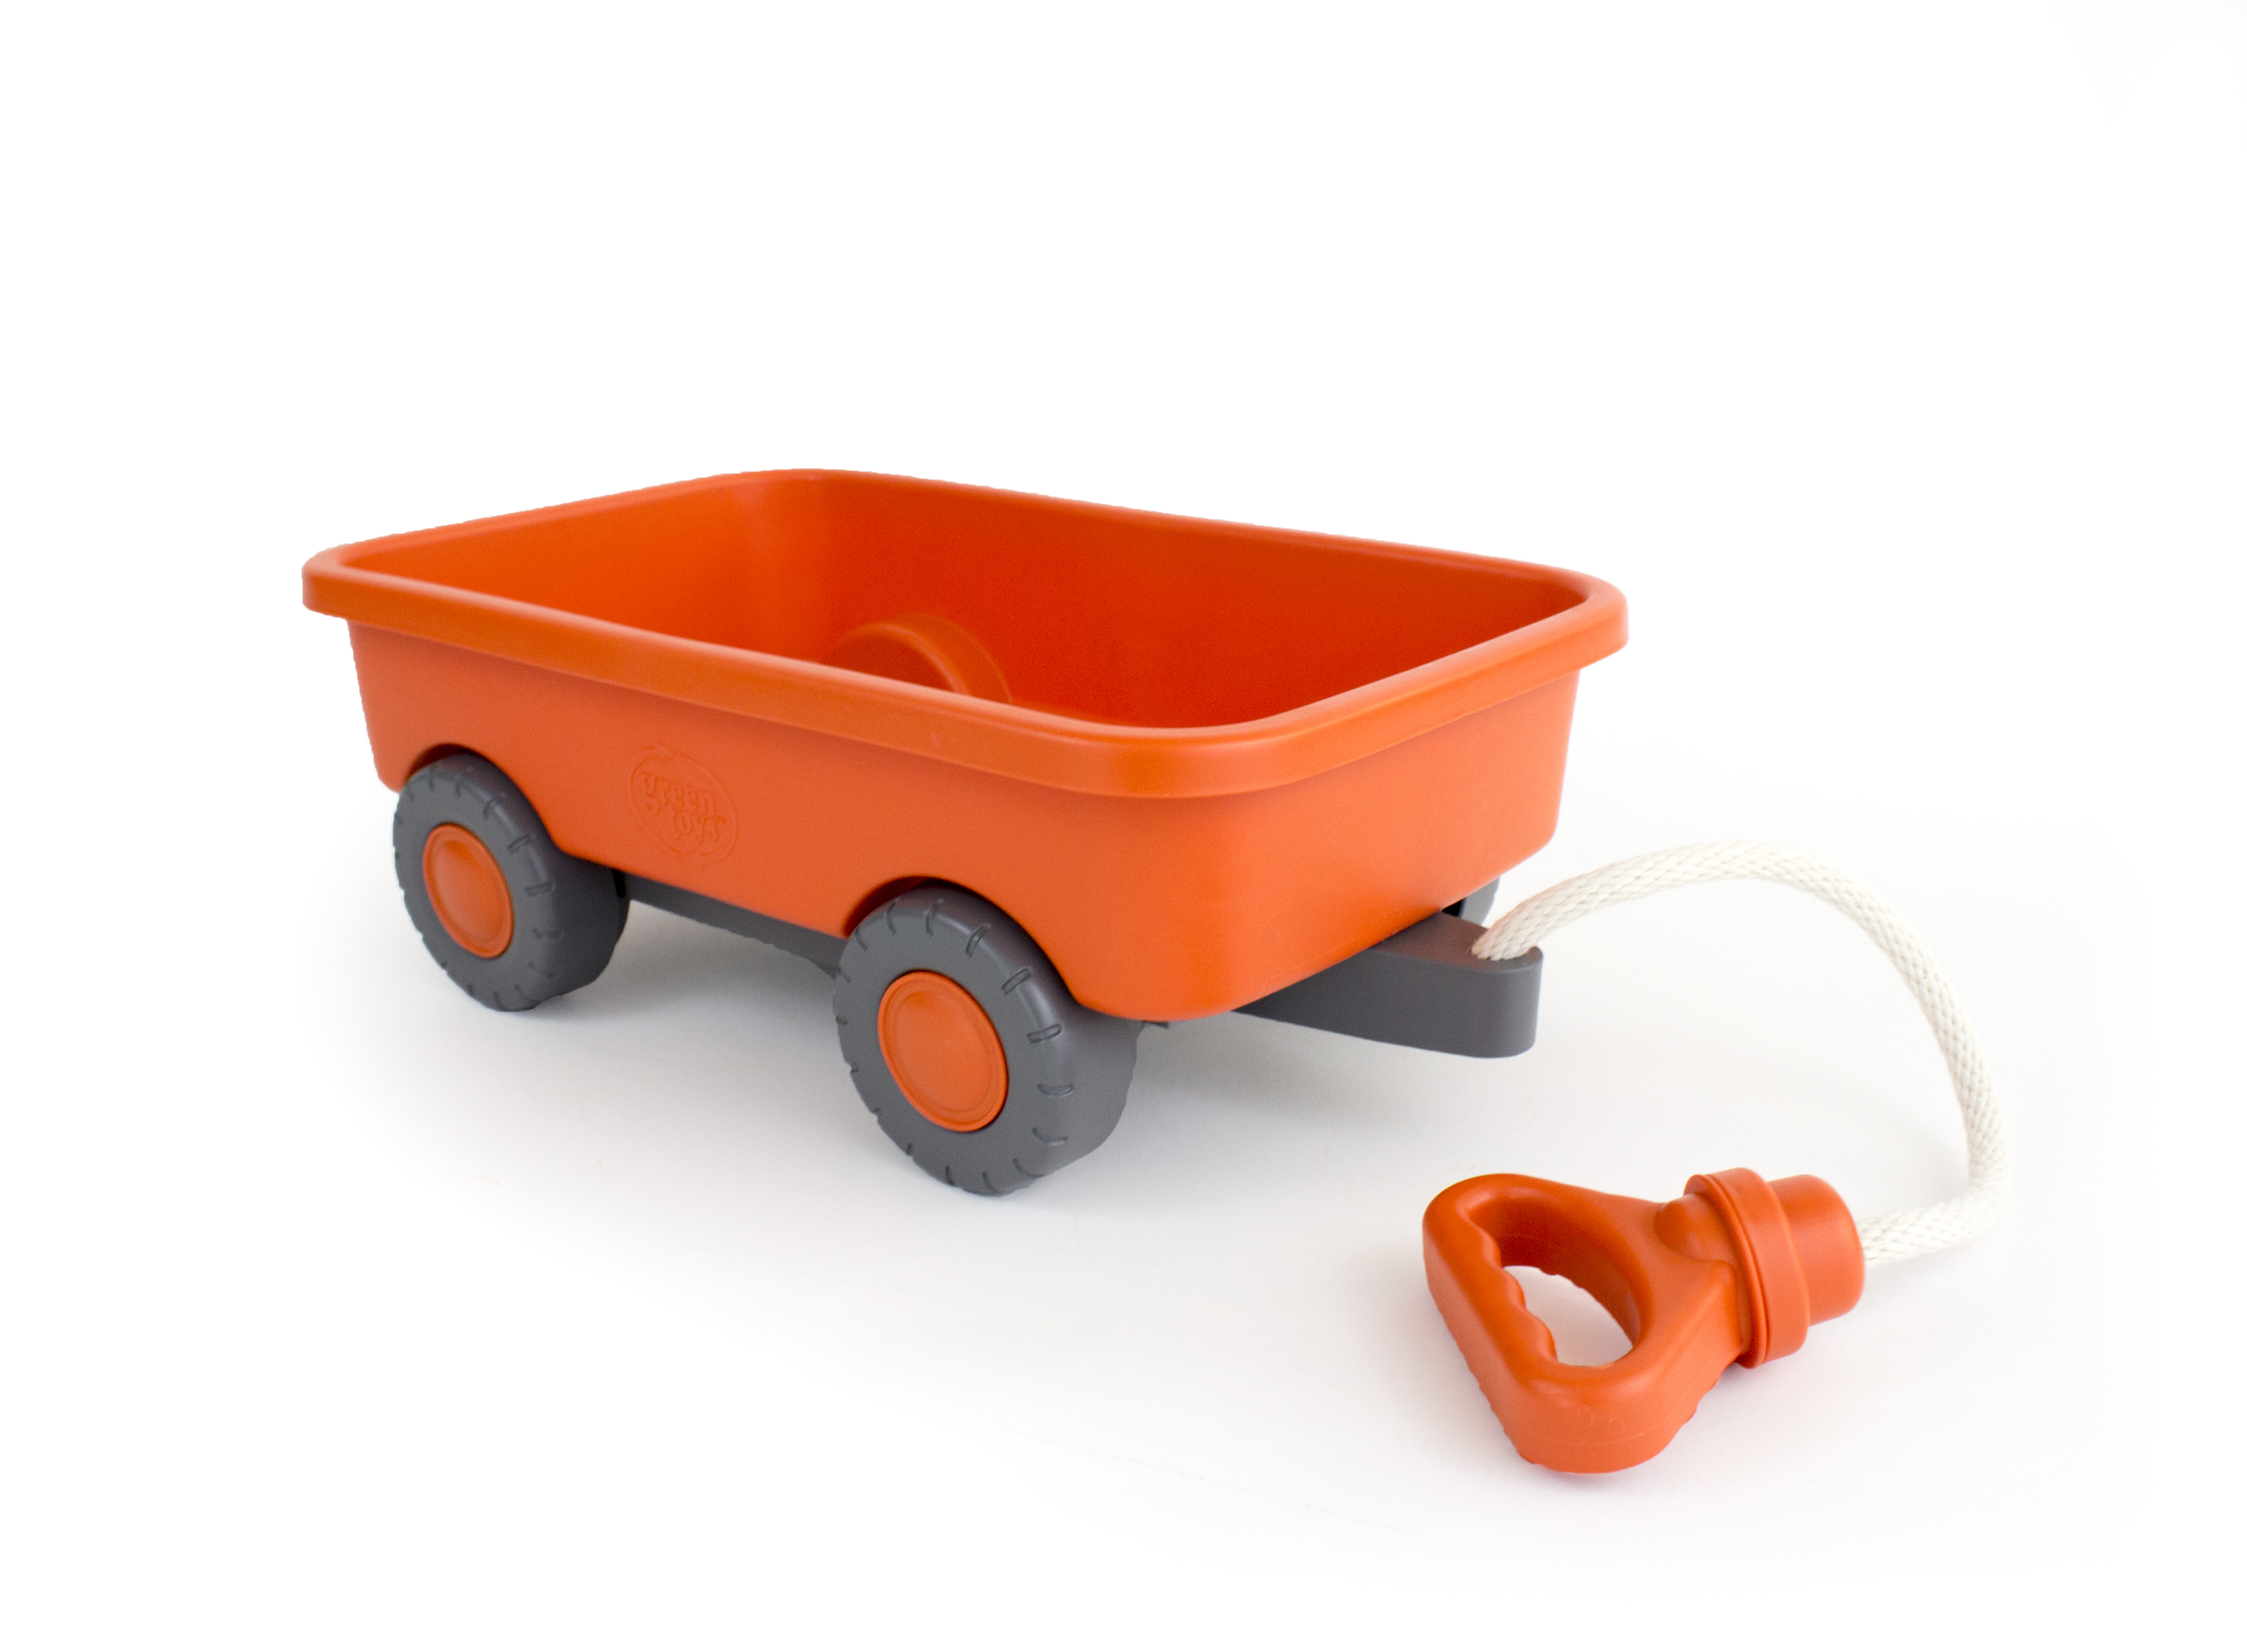 Green Toys Wagon Indoor/Outdoor Toy Orange - image 1 of 2